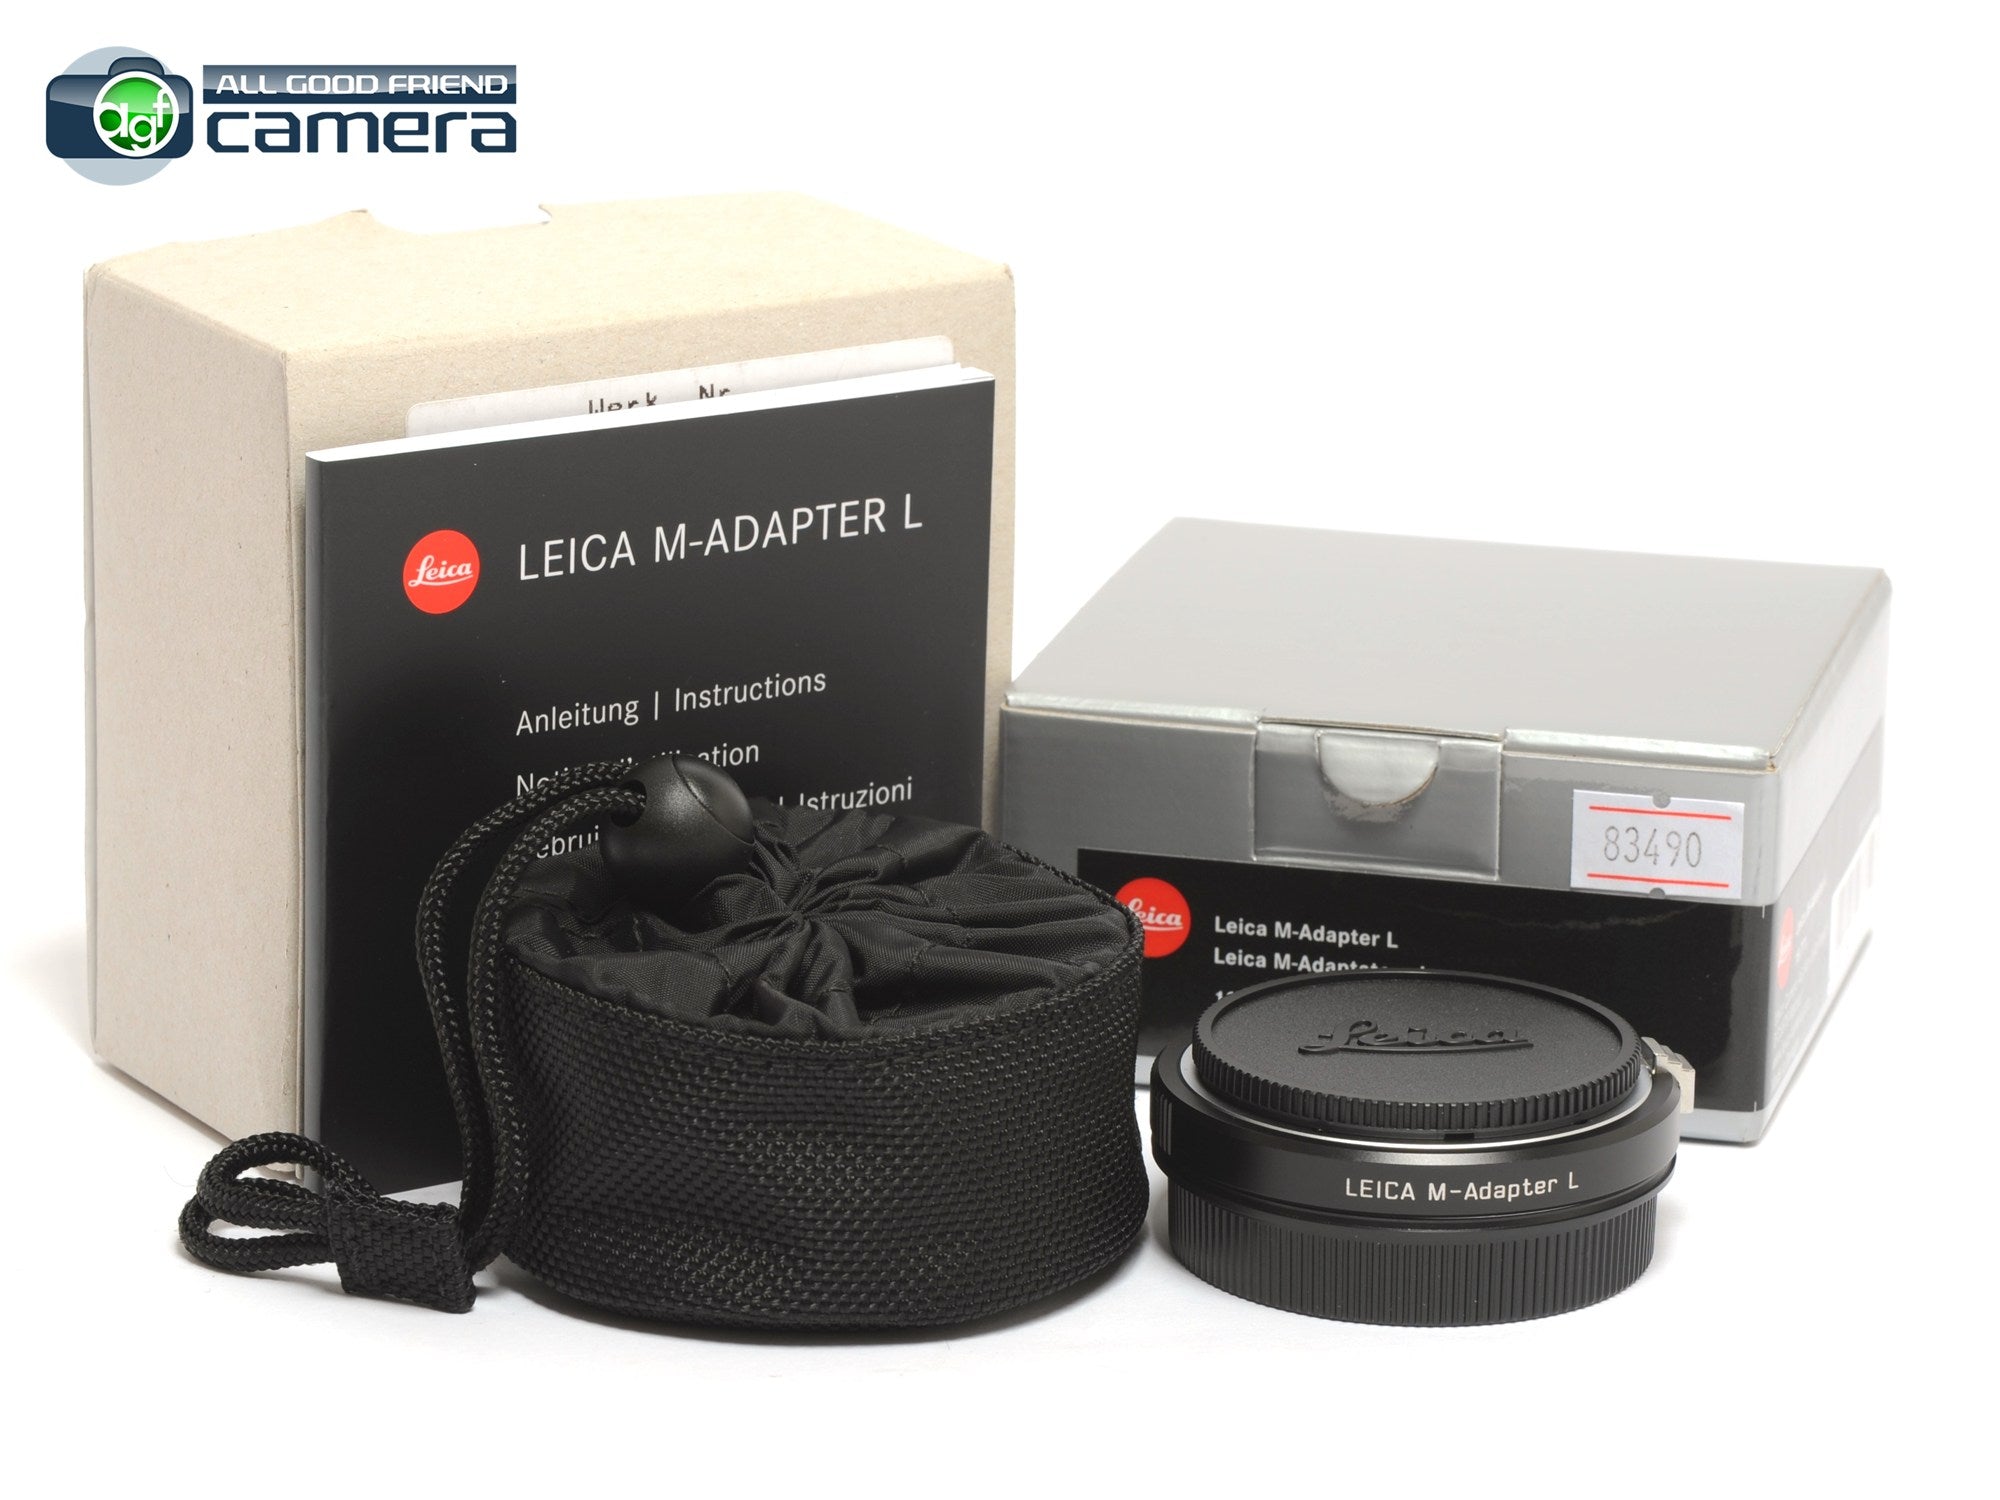 Leica M-Adapter L Black 18771 for M Lenses on TL/CL/SL2 Cameras ...